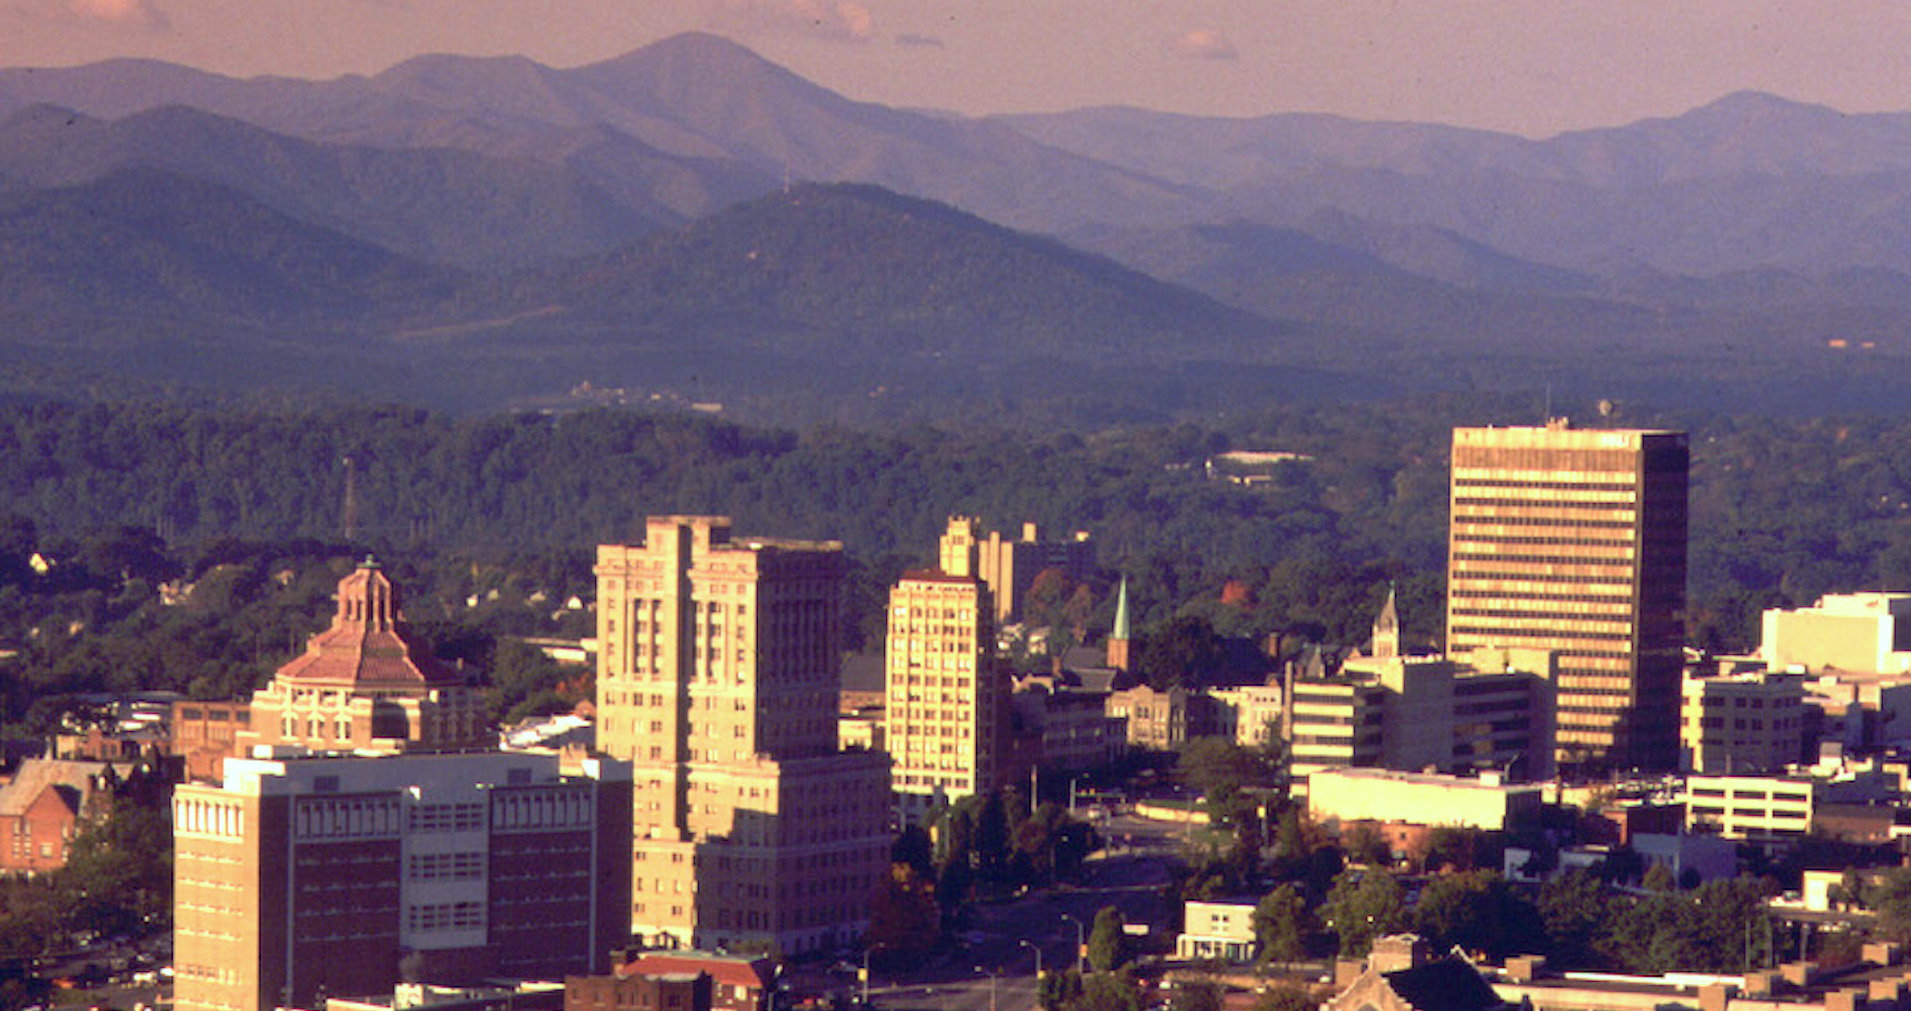 Asheville, NC, the creative hub that's home to Ray Access founders.